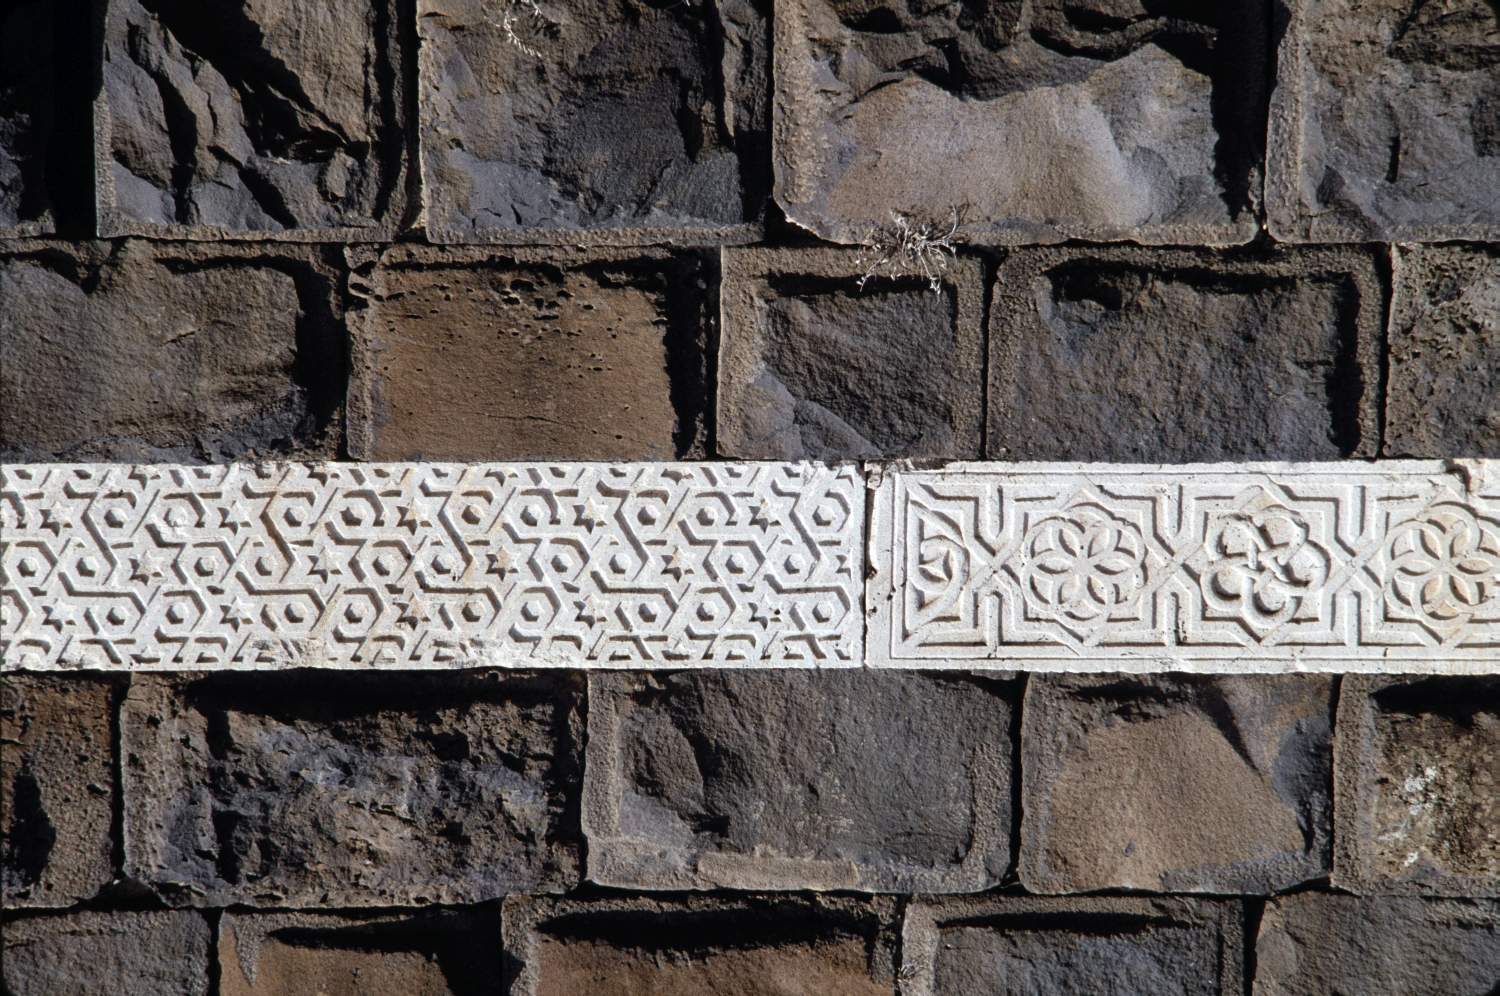 Band of geometric ornament on walls showing two different patterns, one based on six-point stars and hexagons, and another on eight-point stars and rosettes.